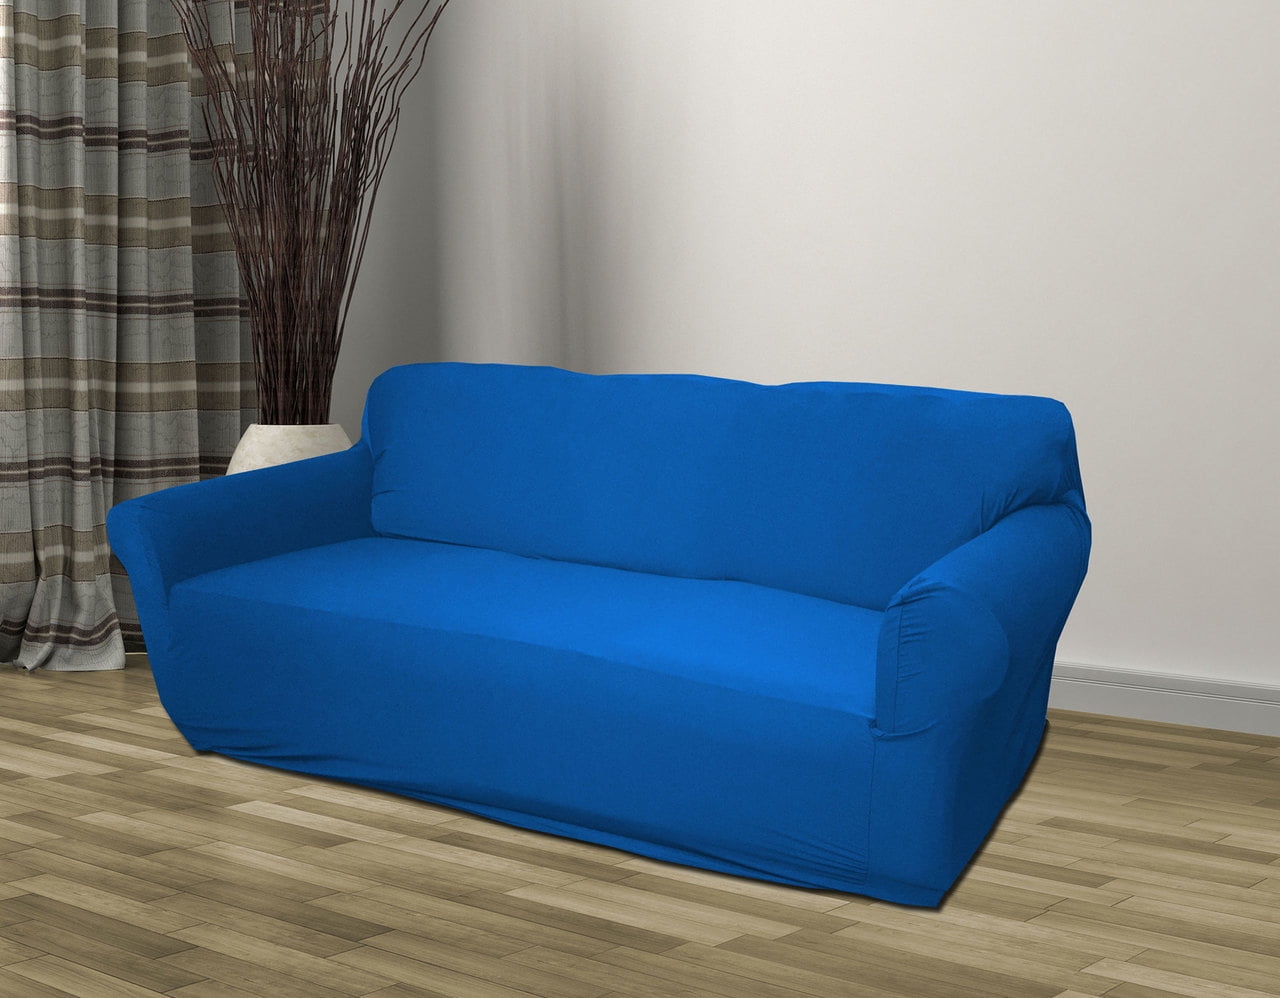 JERSEY "STRETCH LOVESEAT SLIP COVER--COBALT--COMES IN 10 SOLID COLORS & 3 PRINTS 